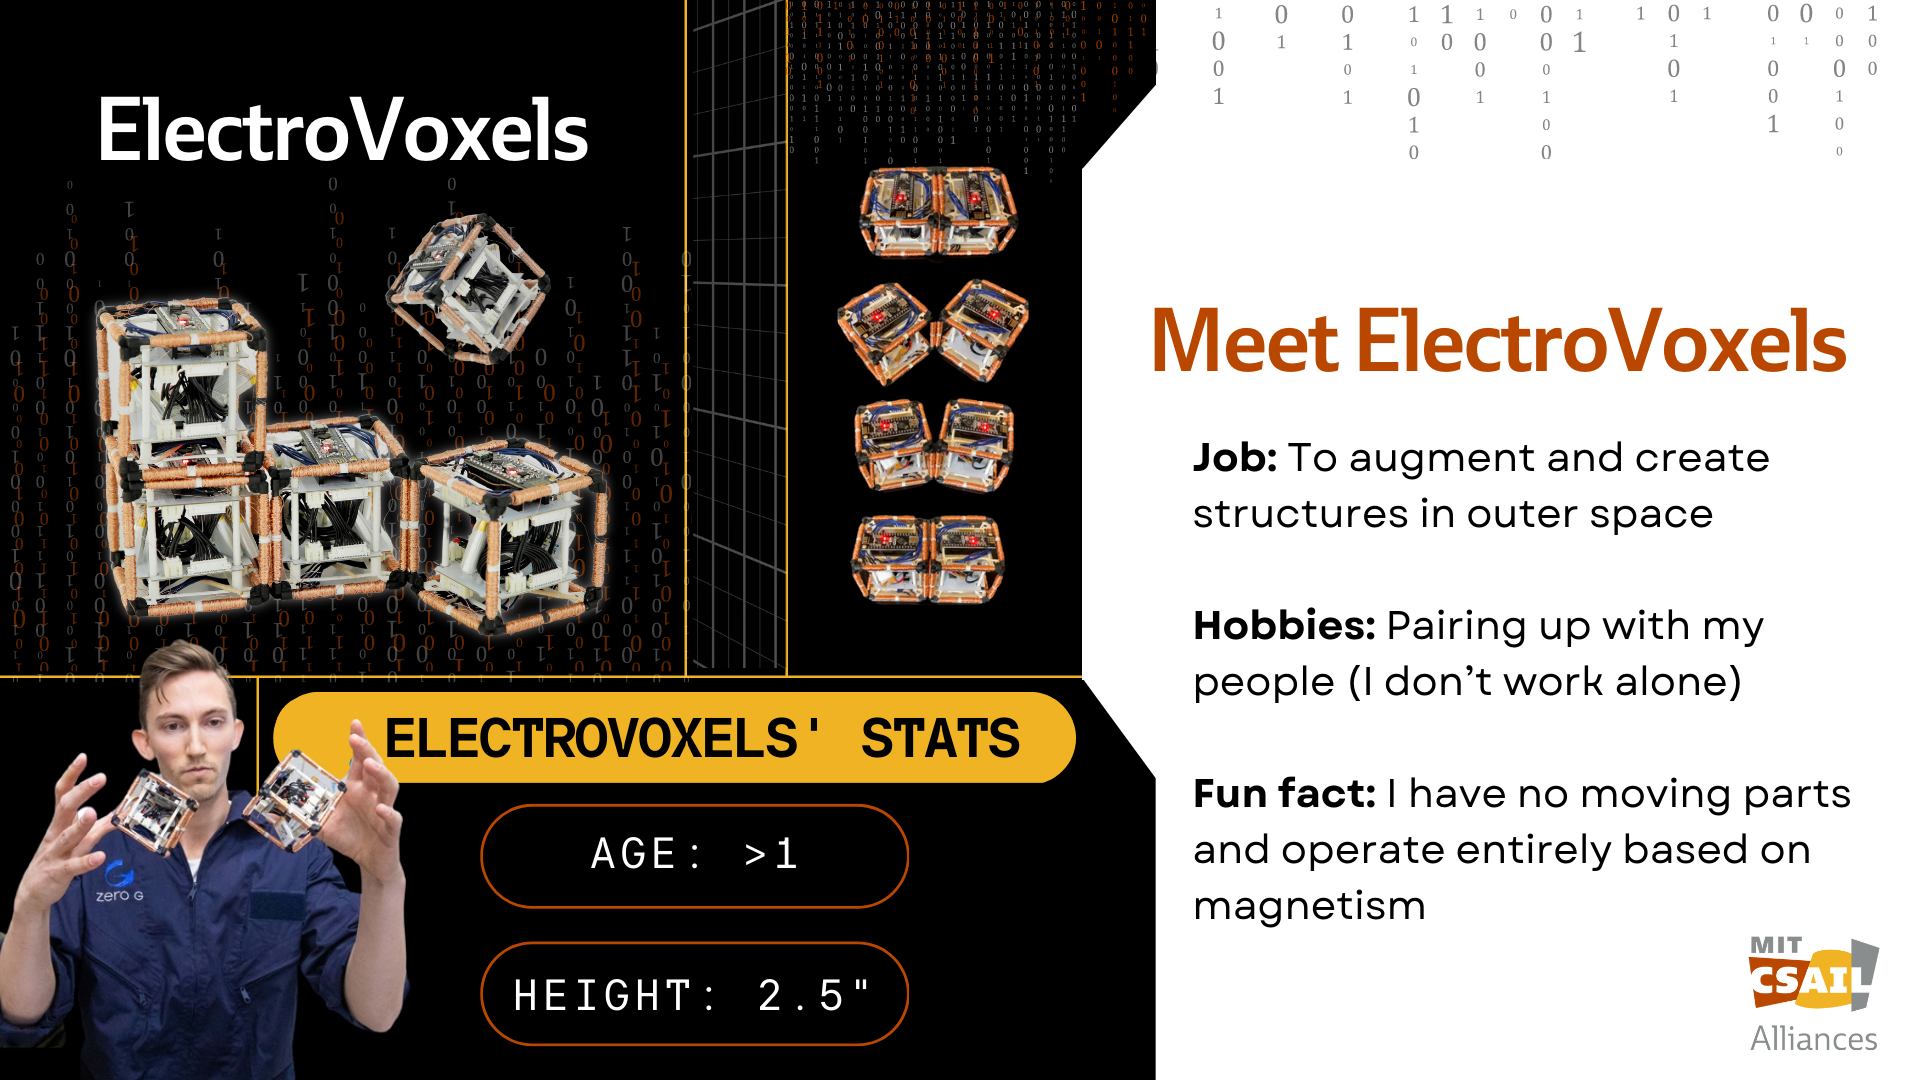 Electrovoxel robotic shapeshifting cubes, in a photo collage with text that reads "Electrovoxels"